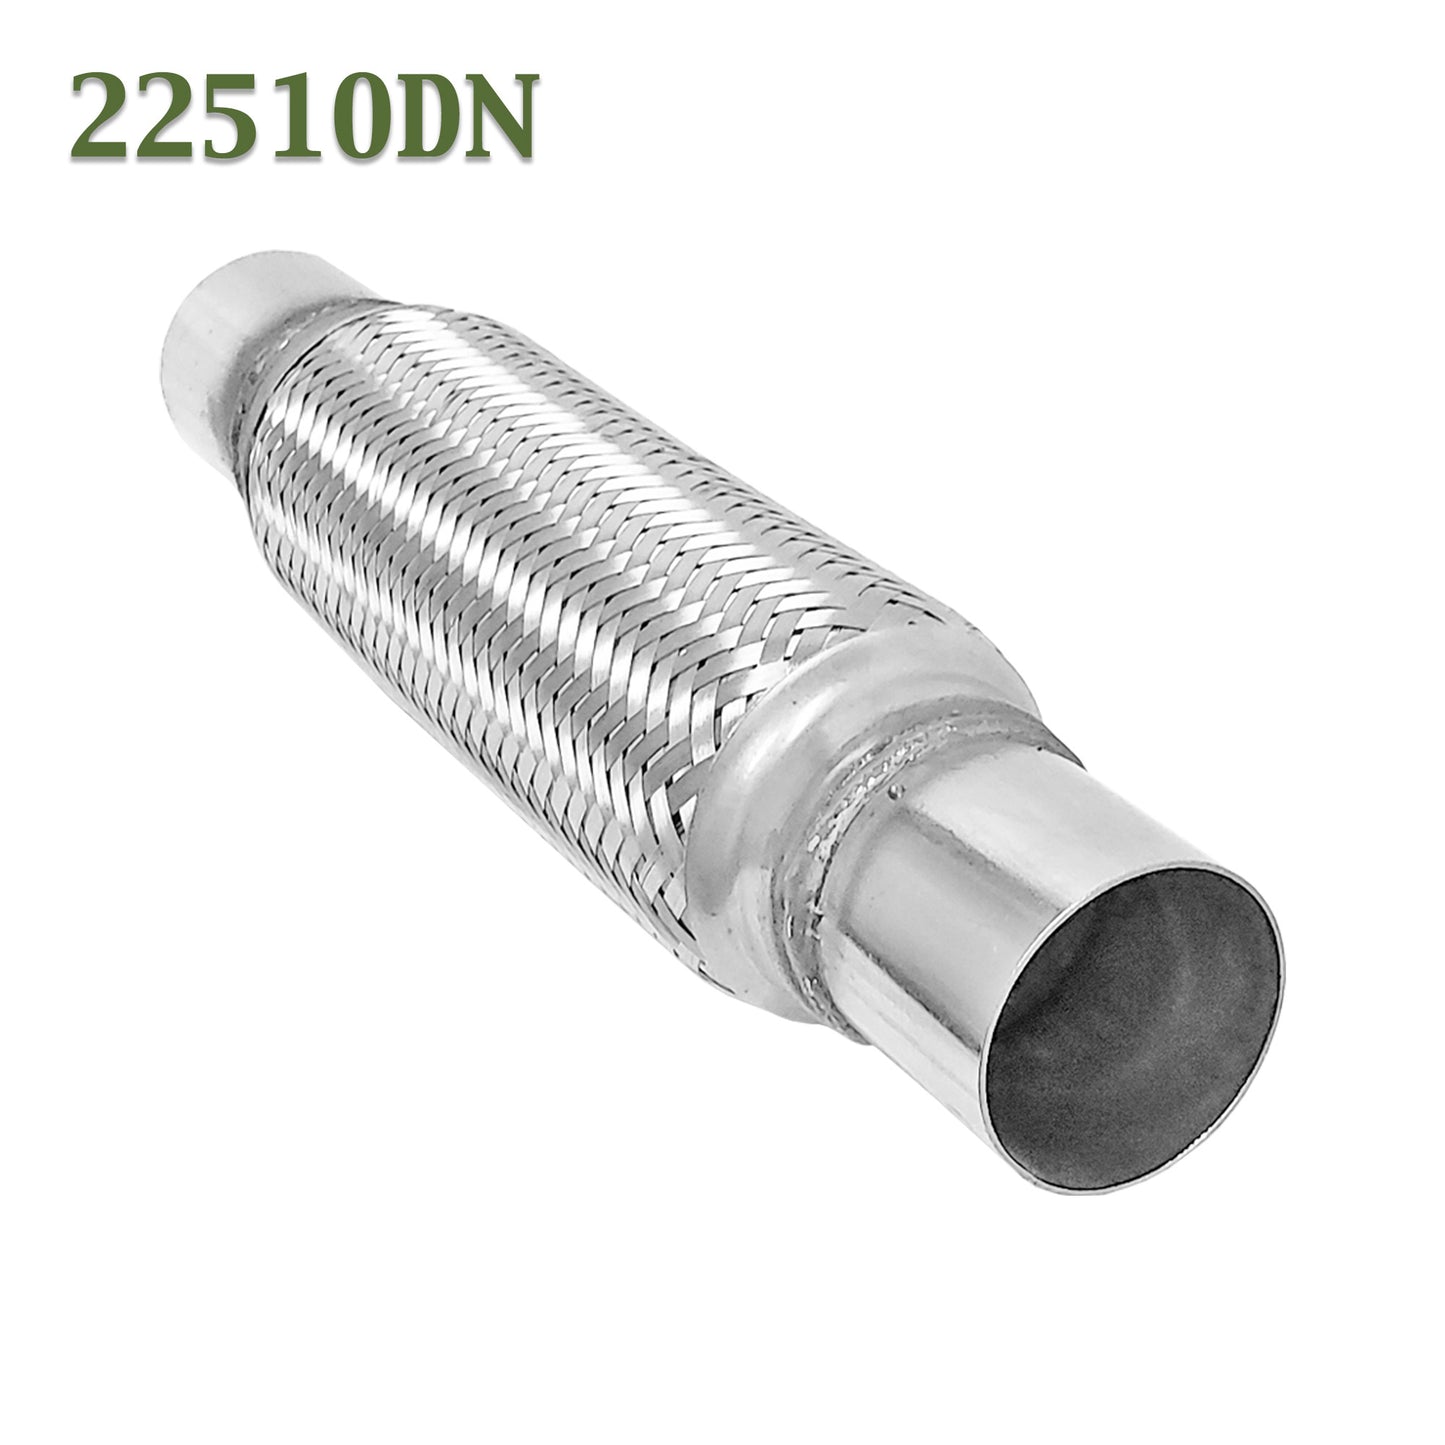 2.25" (2 1/4") x 10" x 14" Flex Pipe Exhaust Coupling Quality Stainless Heavy Duty